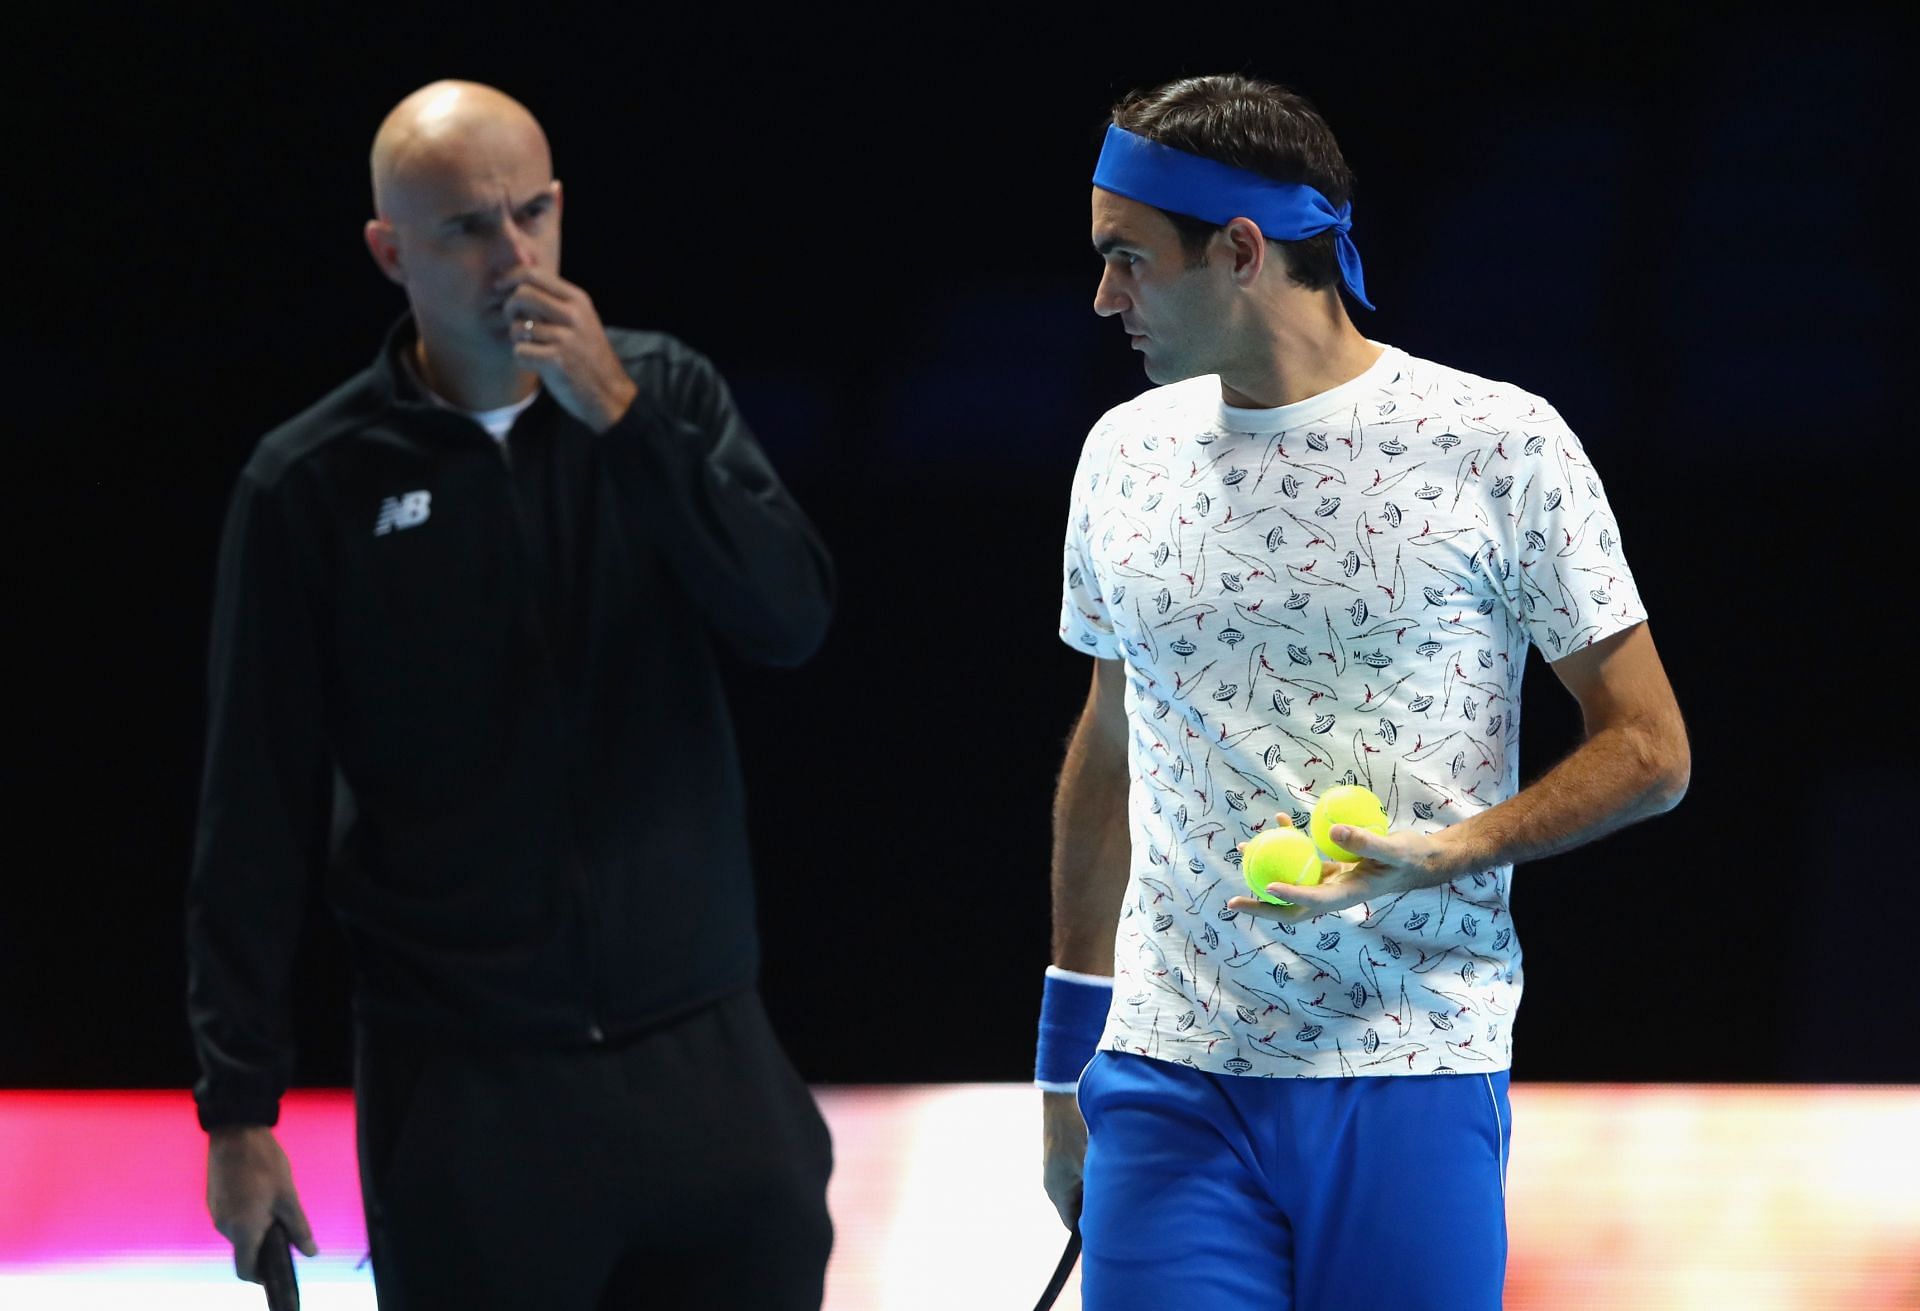 Ivan Ljubicic with Roger Federer at the 2019 Nitto ATP Finals